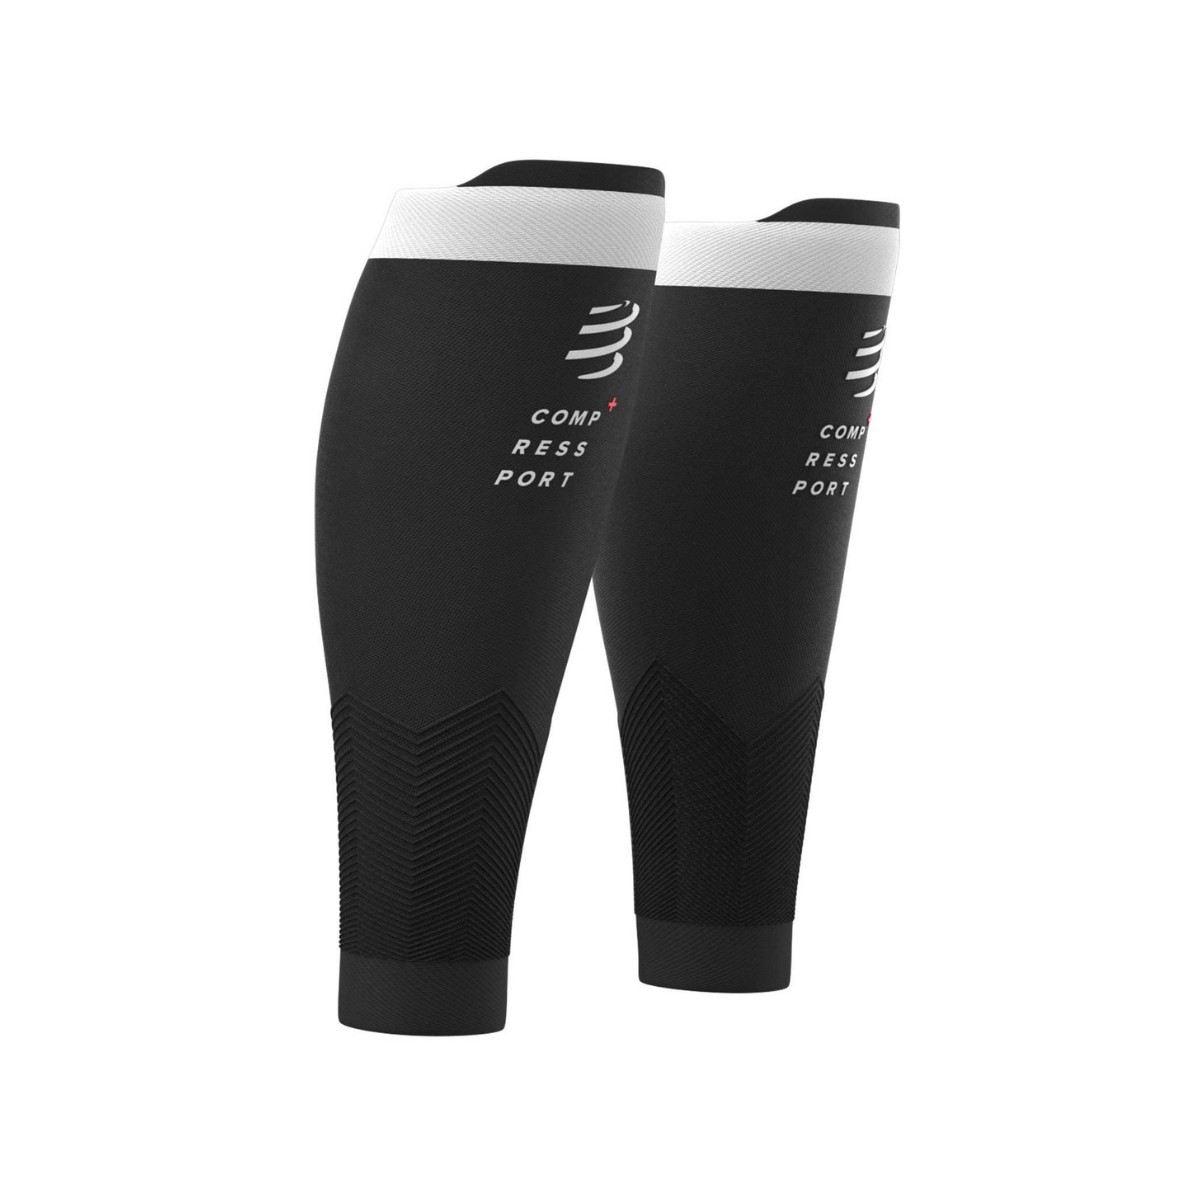 Bas Compressport R2V2 Noir, Taille Taille 4